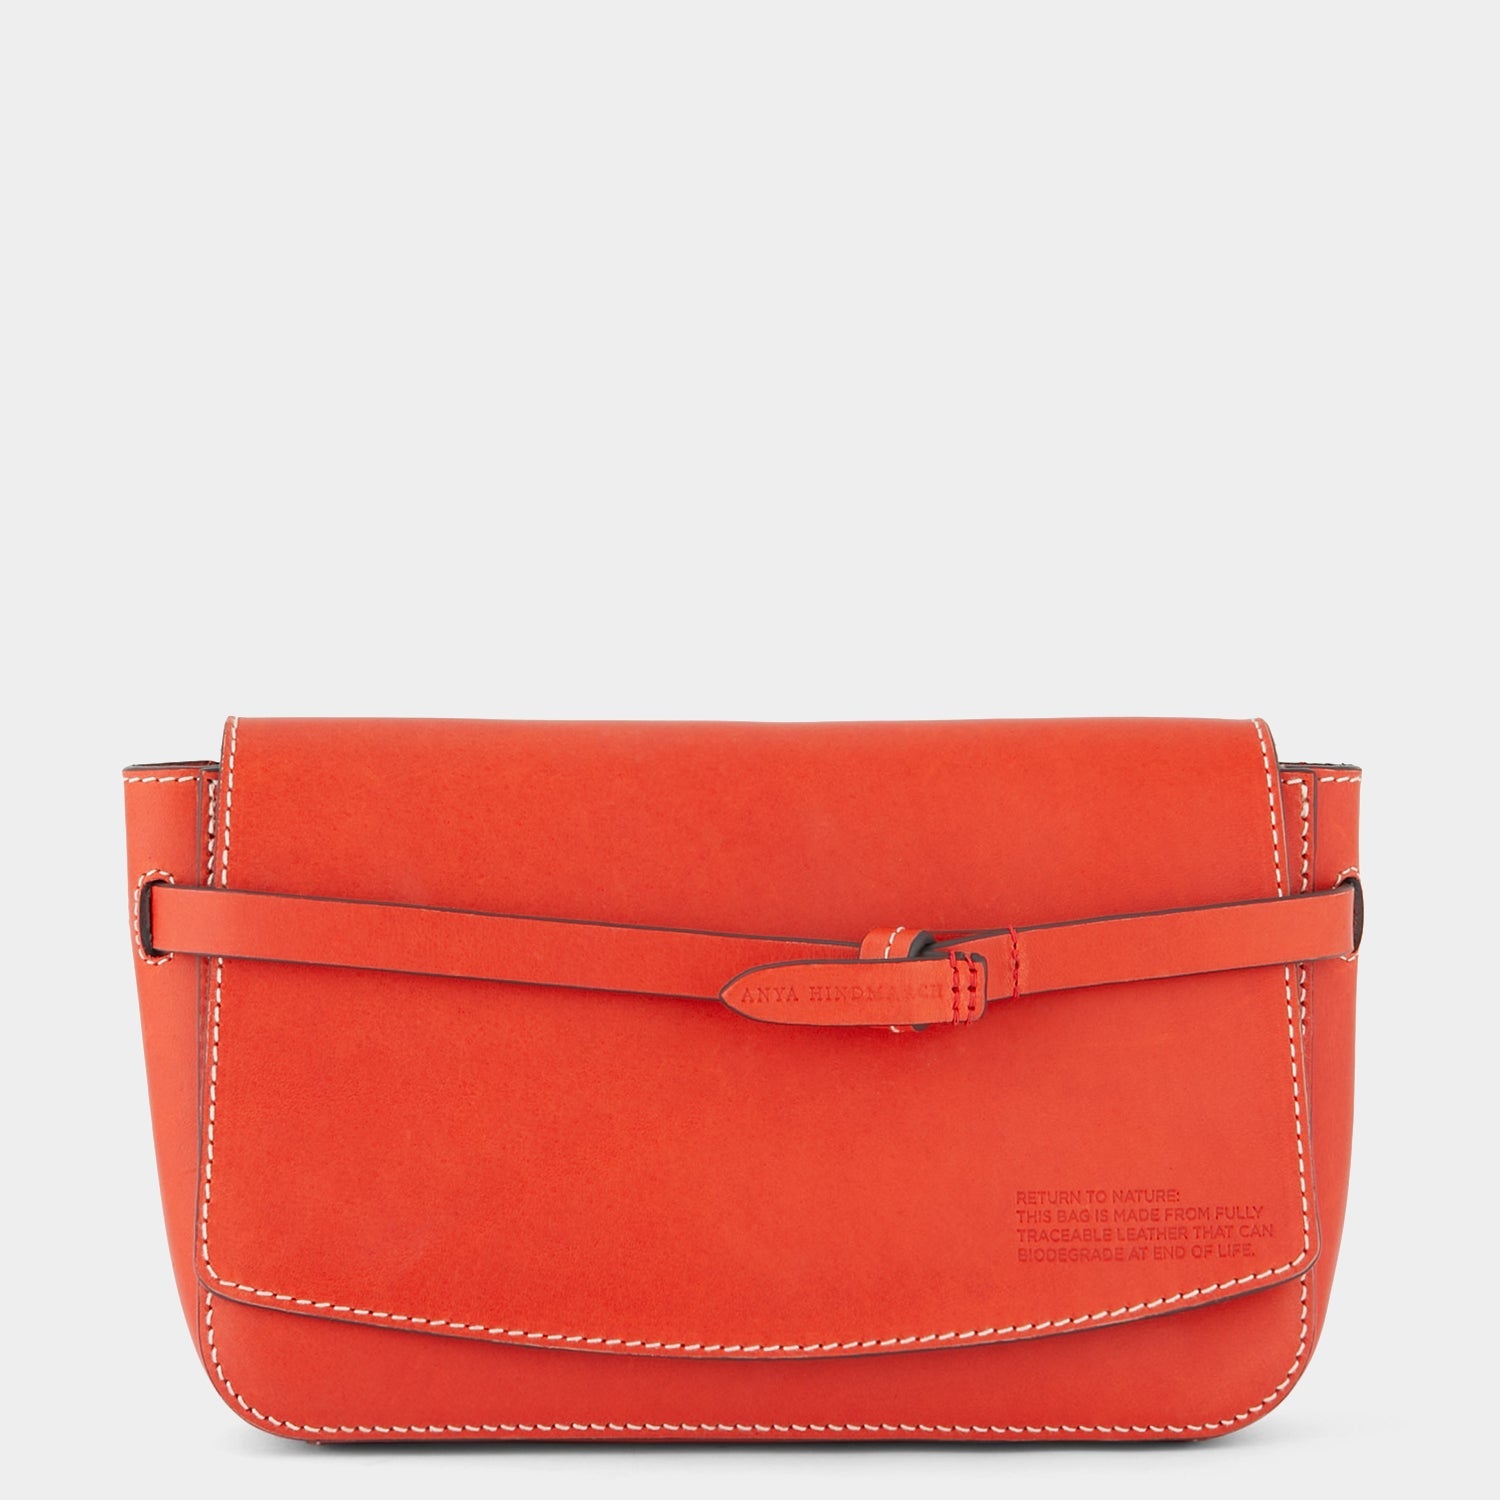 Return to Nature Clutch -

                  
                    Compostable Leather in Flame Red -
                  

                  Anya Hindmarch EU
